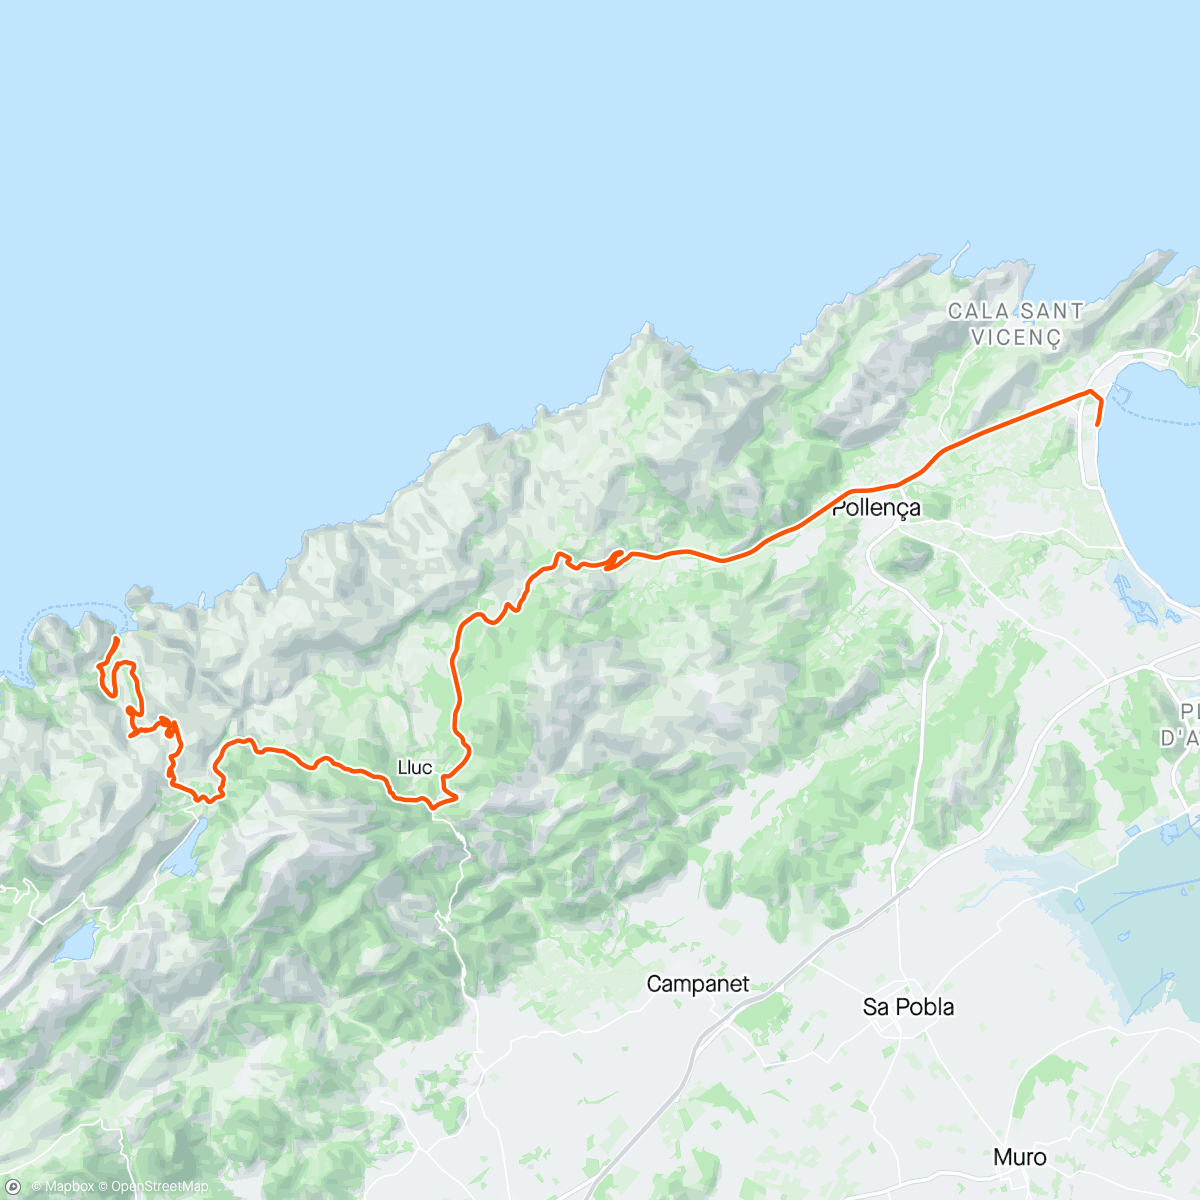 Map of the activity, Majorca - Sa Calobra - lots of huffing, puffing and grunting 😂 lots of chocolate consumed (in the name of carb loading!!)